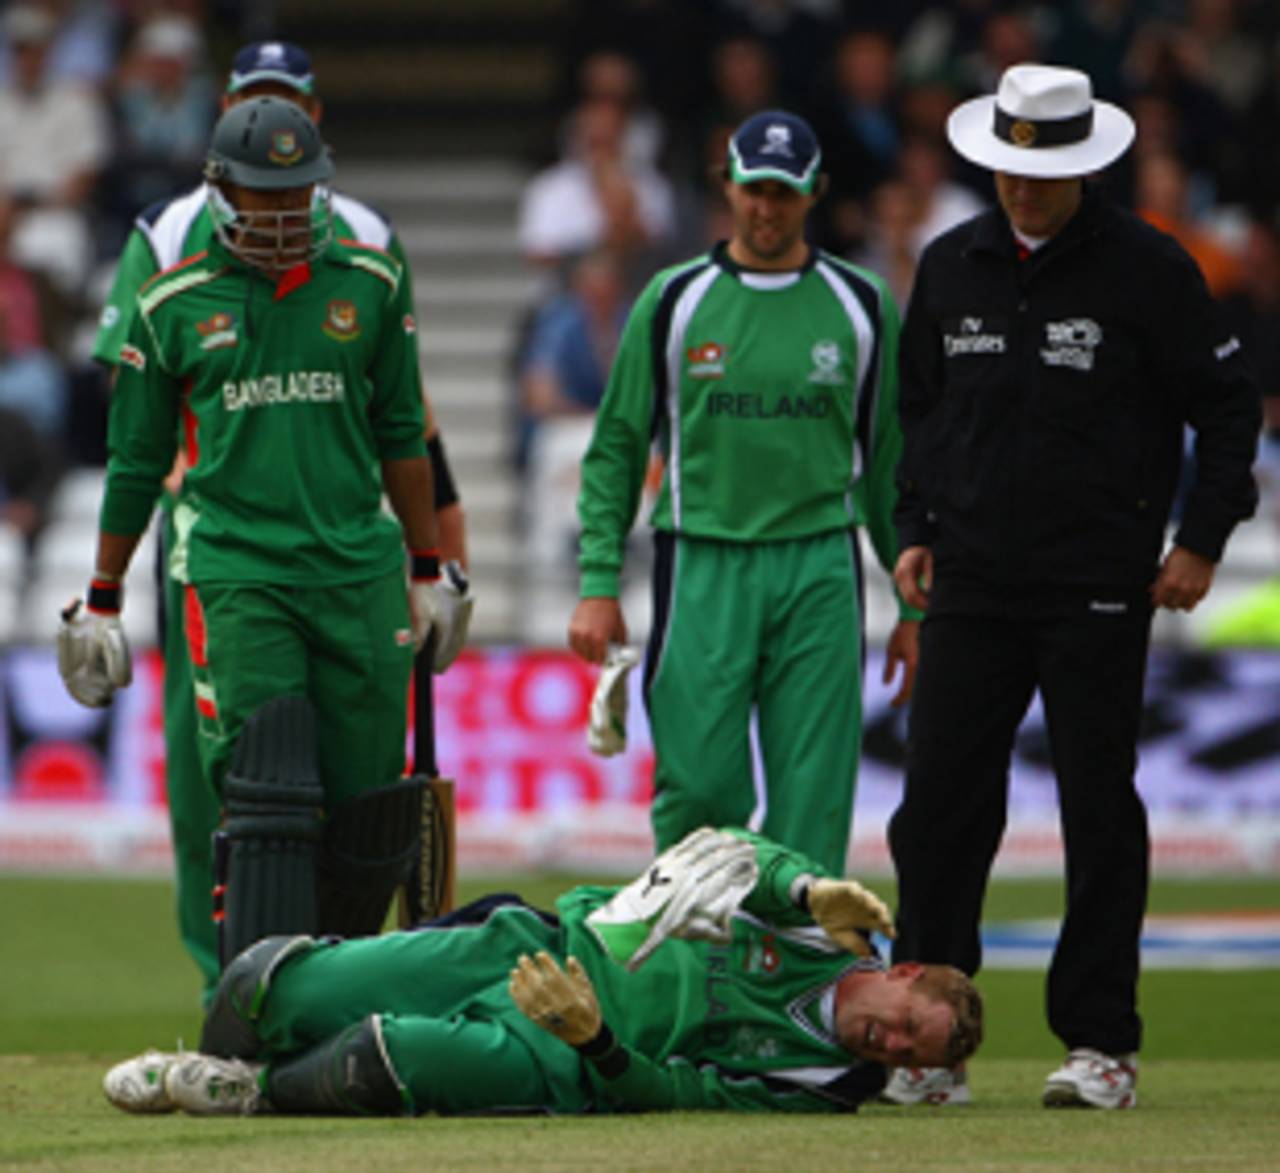 Niall O'Brien is in pain after slipping while attempting a run-out, Bangladesh v Ireland, ICC World Twenty20, Trent Bridge, June 8, 2009